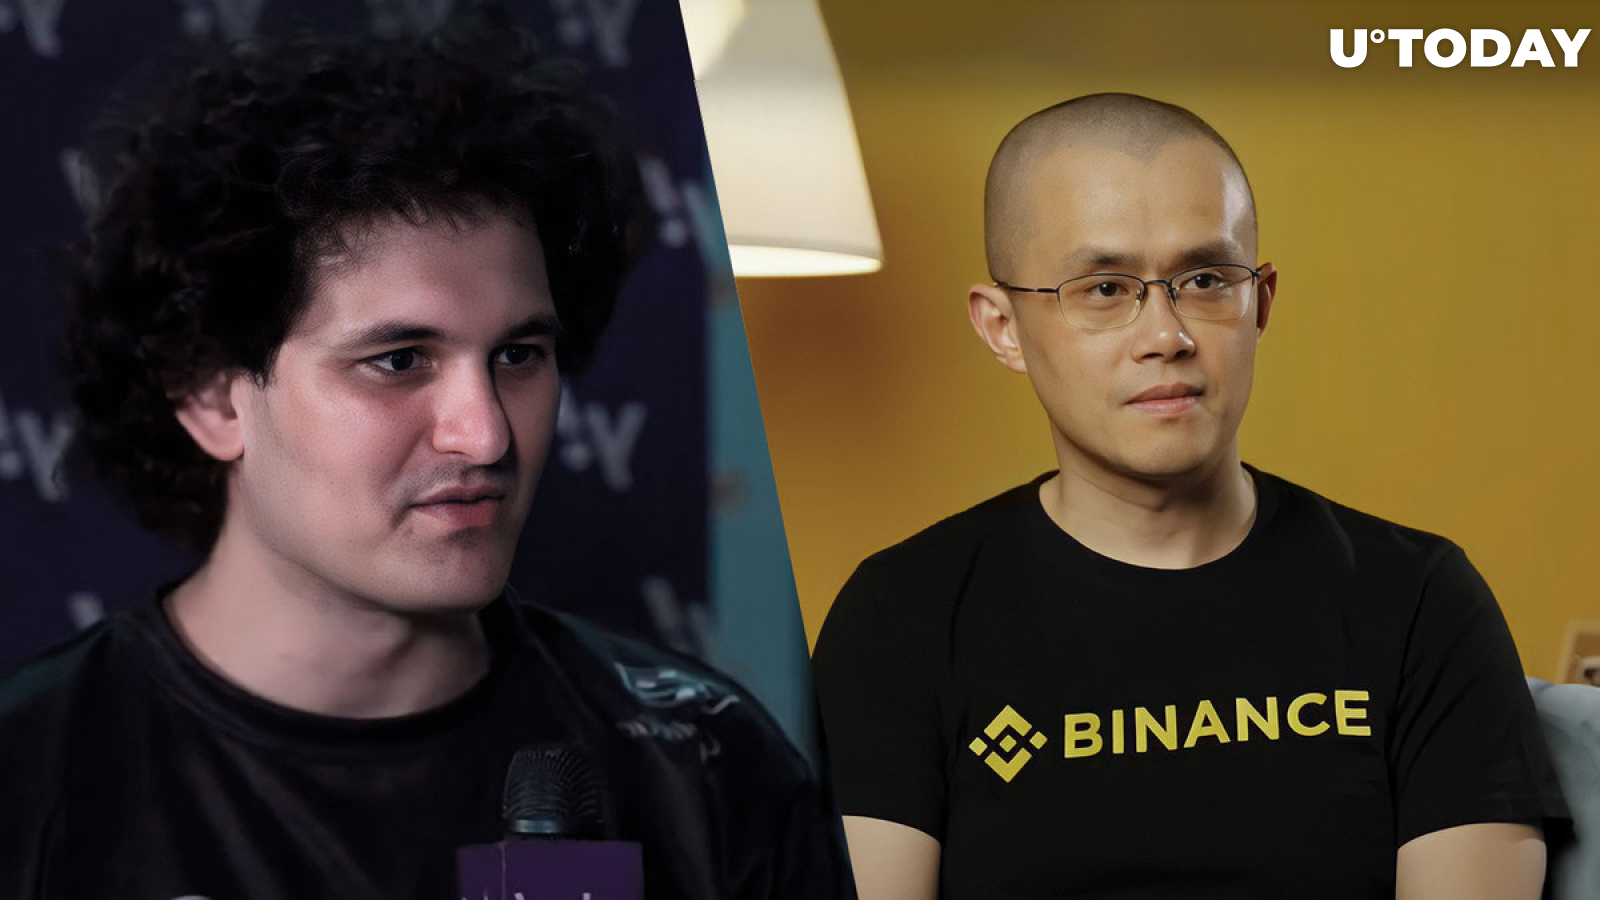 FTX CEO Accuses Competitor of False Rumors, Addressing Binance CEO